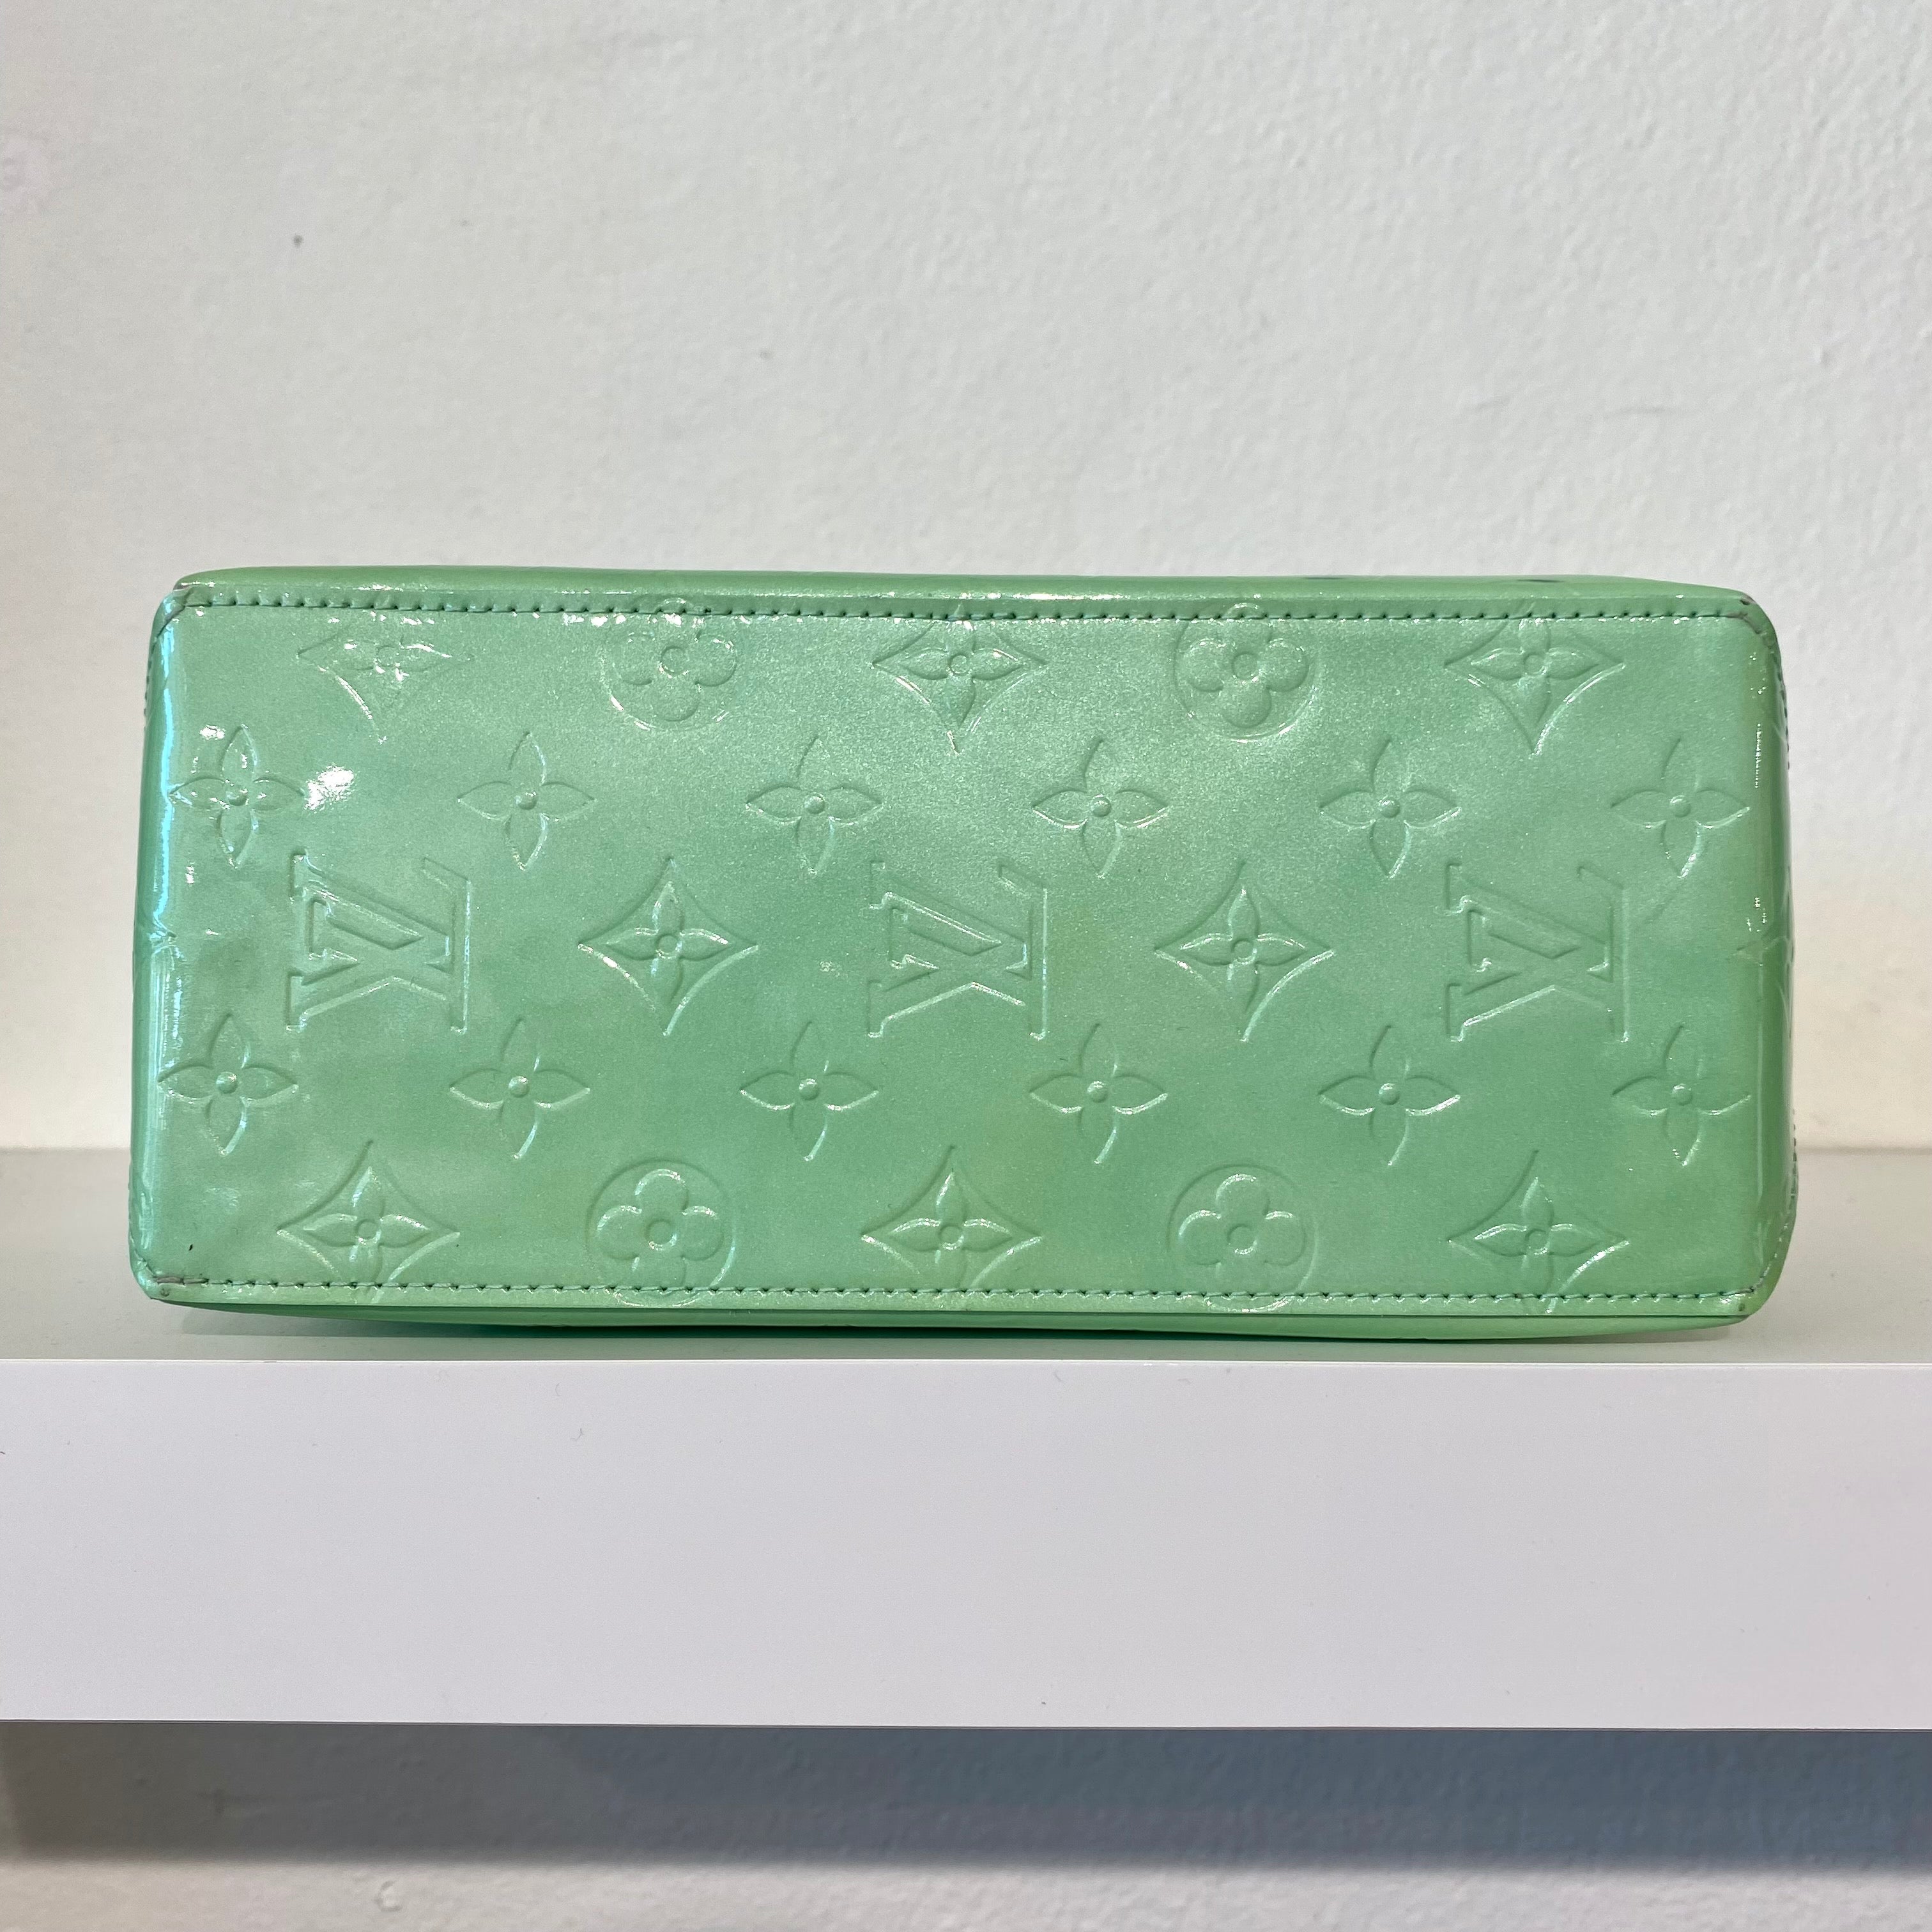 Louis Vuitton Mint Vernis Mini Tote – Dina C's Fab and Funky